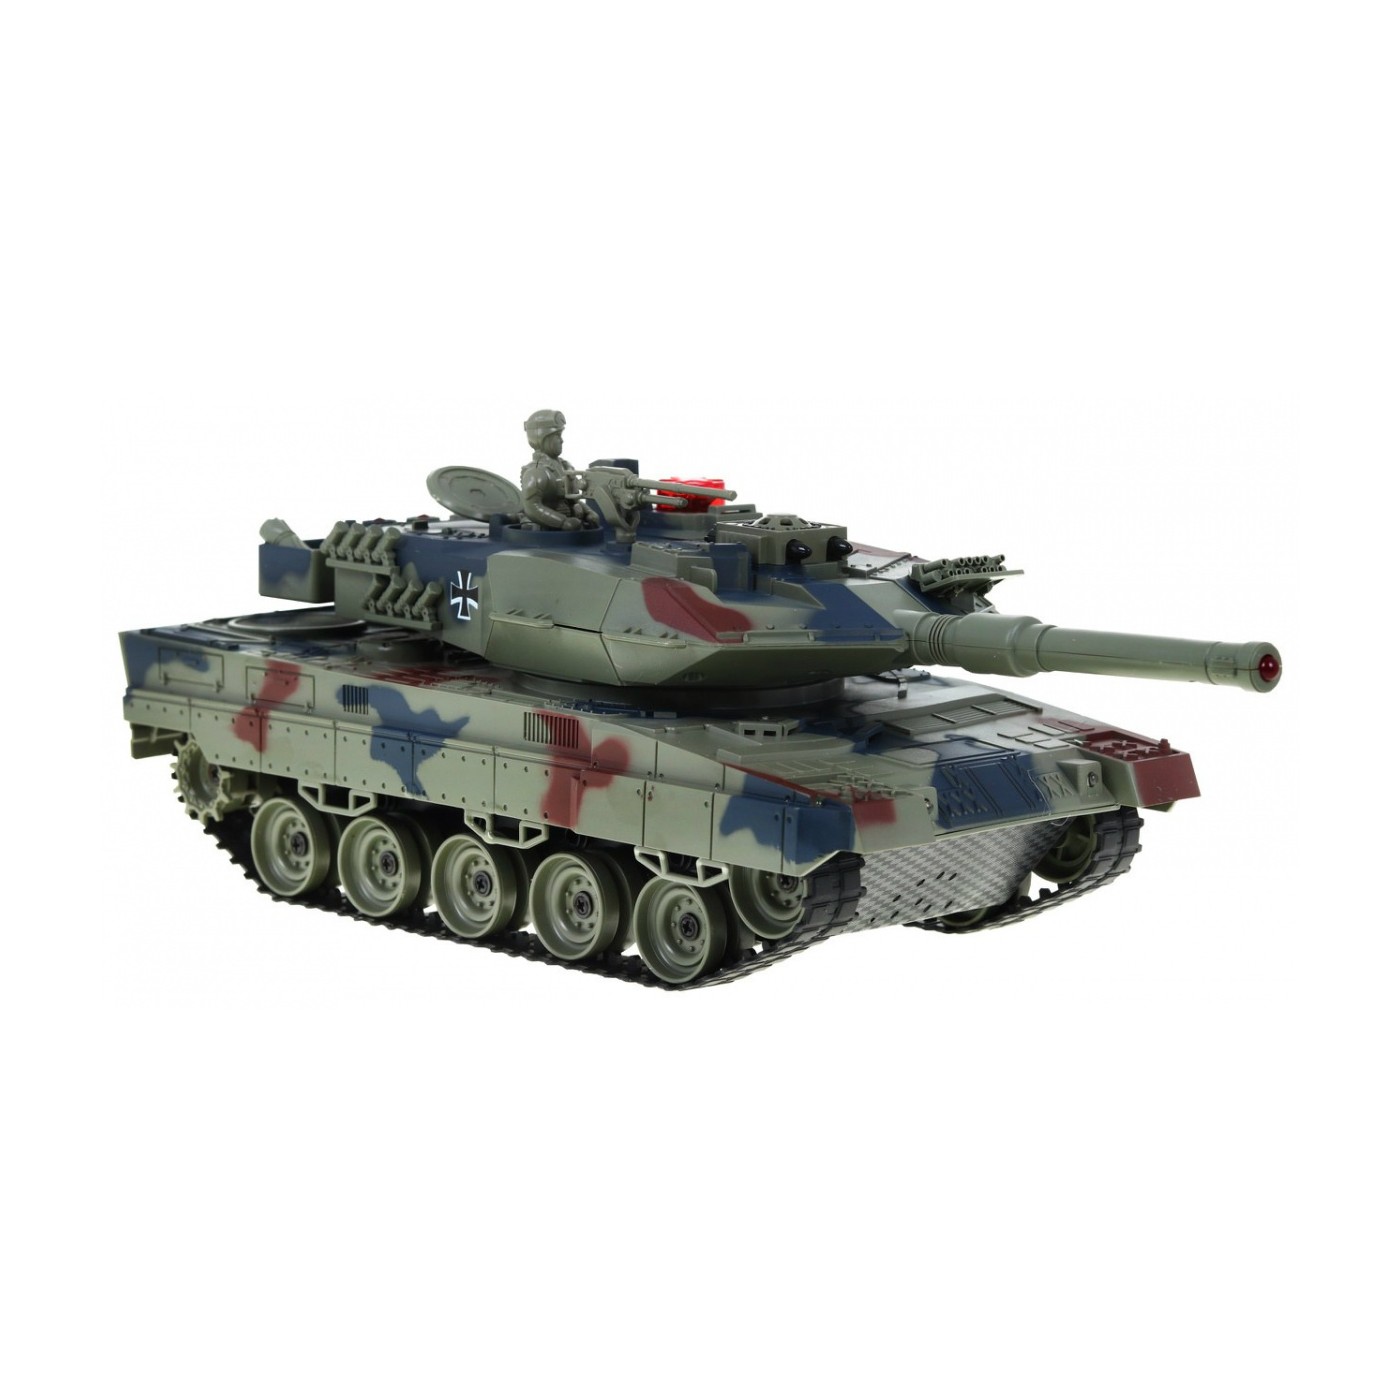 Battle of the war with the smoke Tank R/C 2.4 G